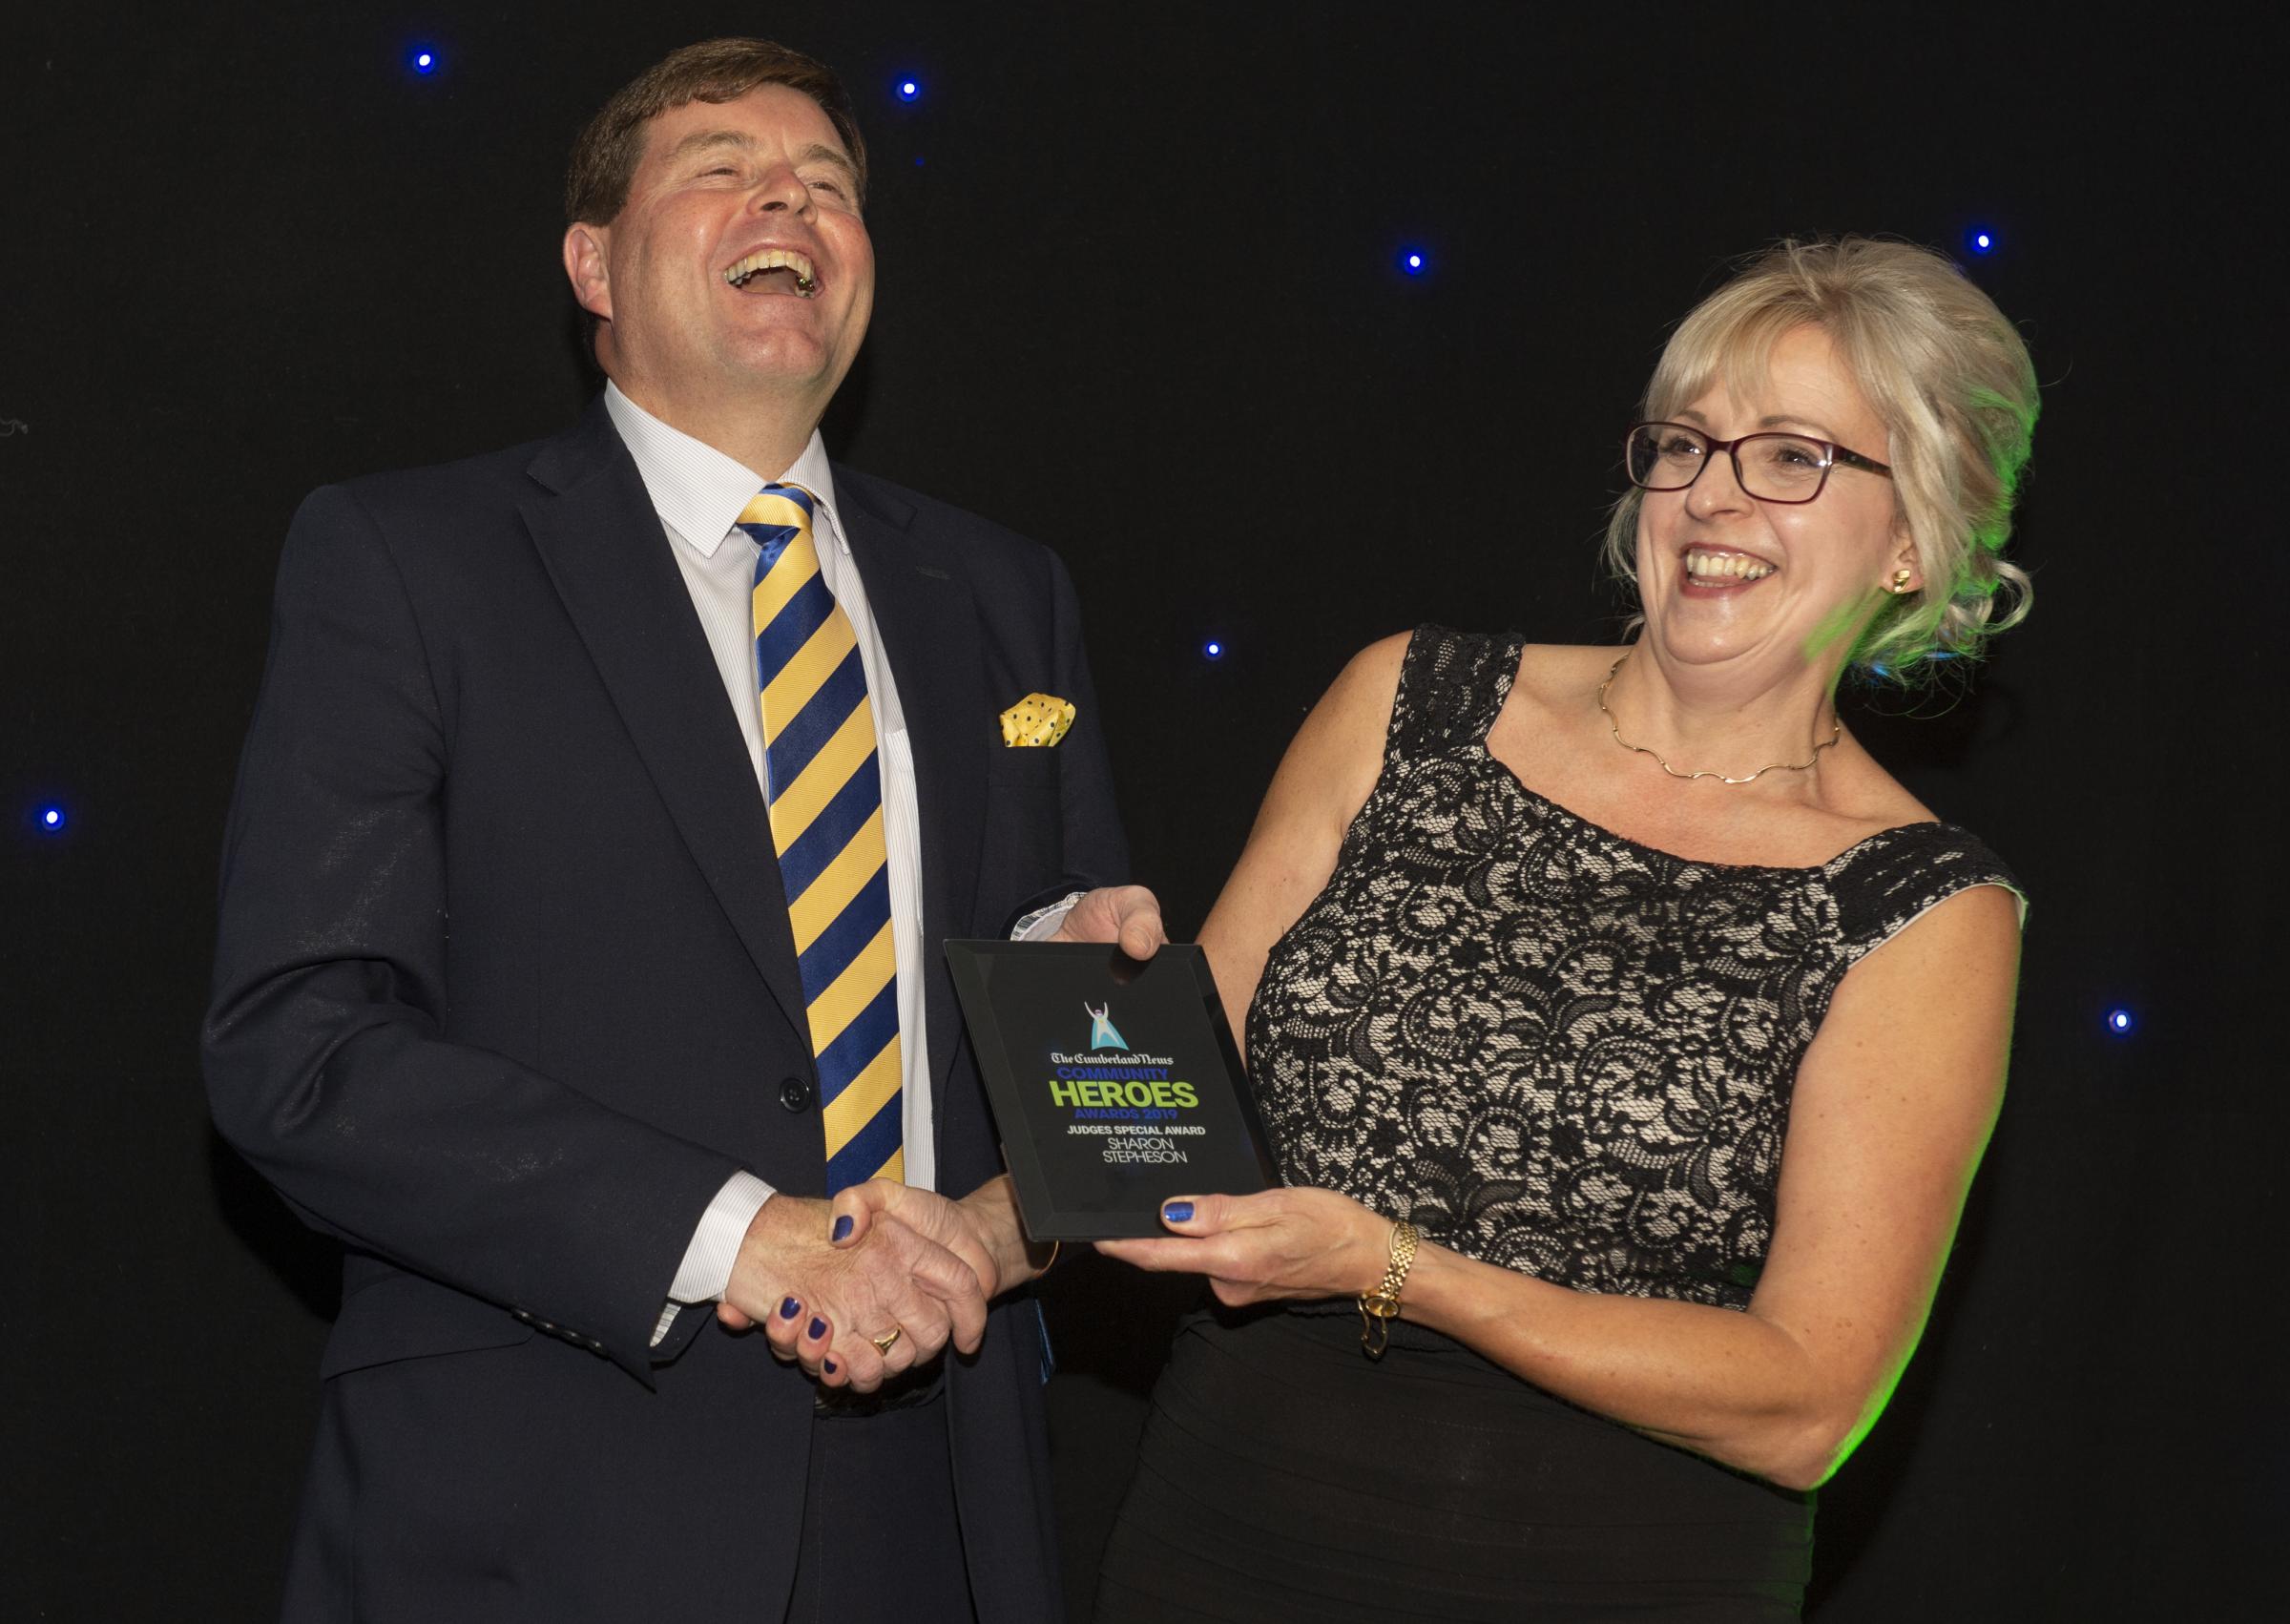 SMILES: Sharon Stephenson receives the judge’s special award from Peter McCall at Carlisle Racecourse in 2019. Picture: Jonathan Becker, info@beckerphoto.co.uk